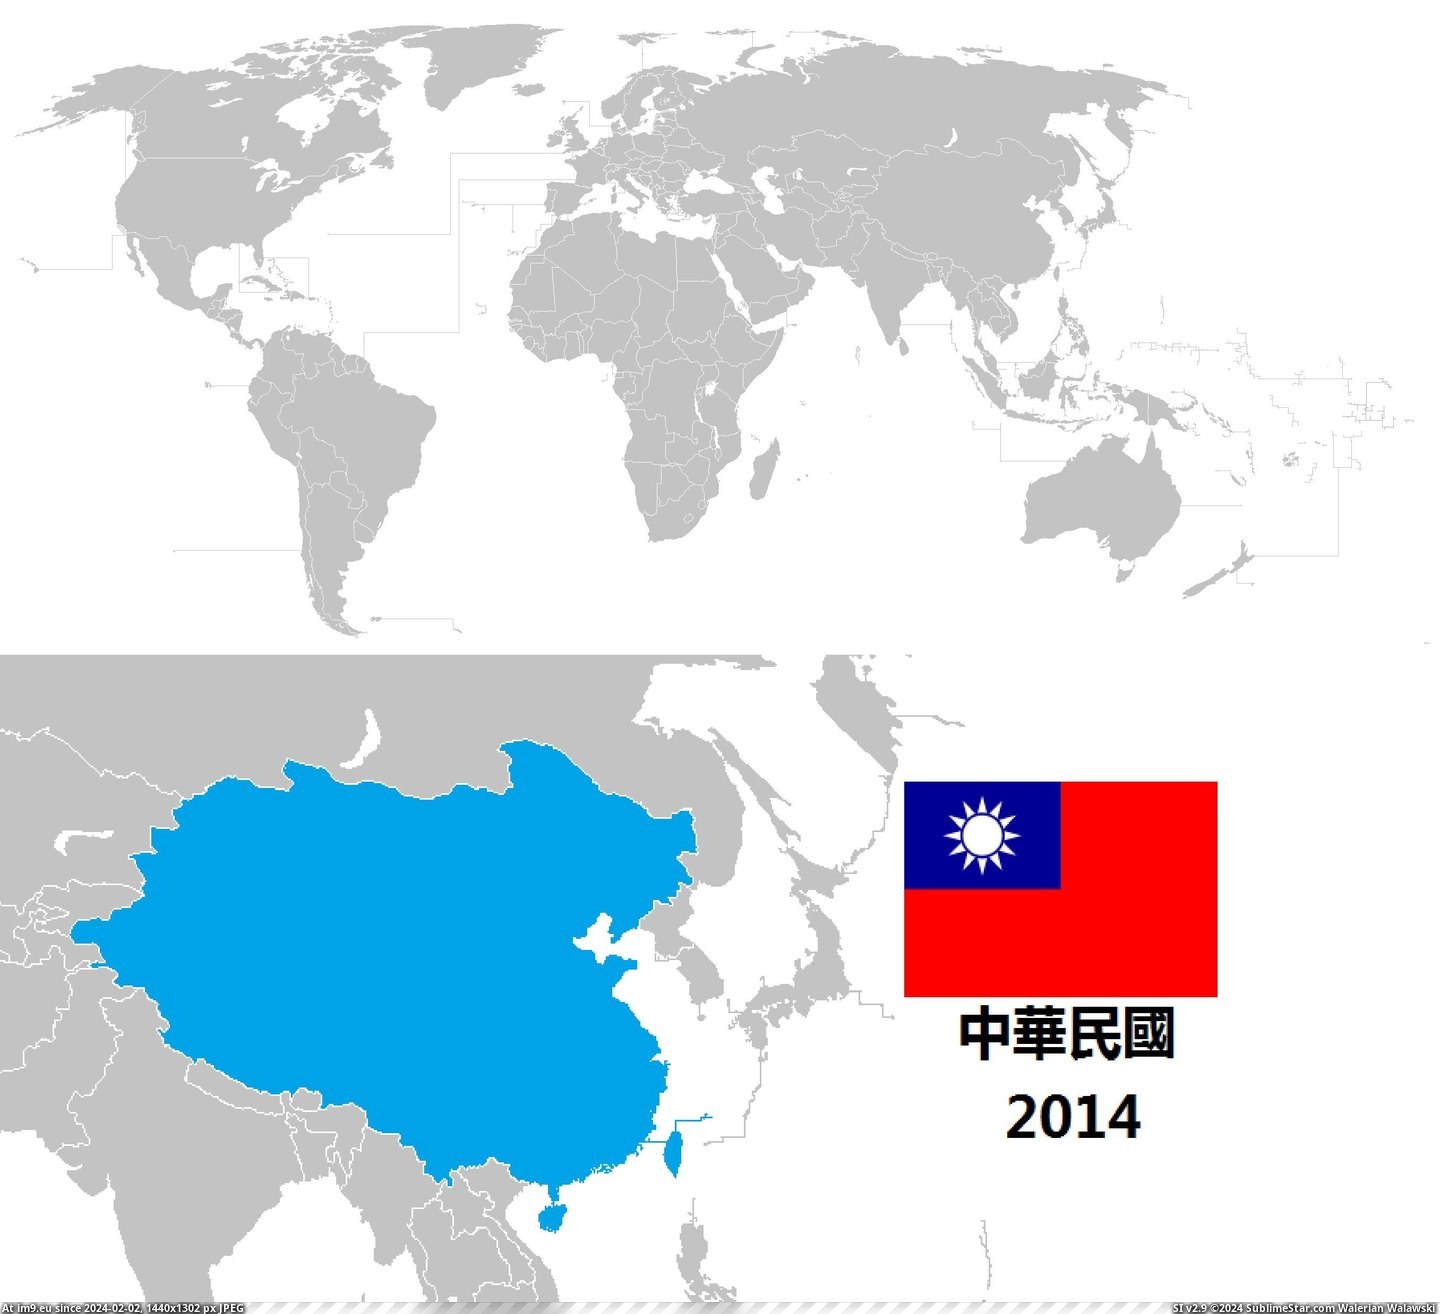 #World #May #Due #Territorial #Boredom #Accura #Based #Claims #Taiwan [Mapporn] The World according to Taiwan, i made due to boredom, based on all of their territorial claims, may not be 100% accura Pic. (Bild von album My r/MAPS favs))